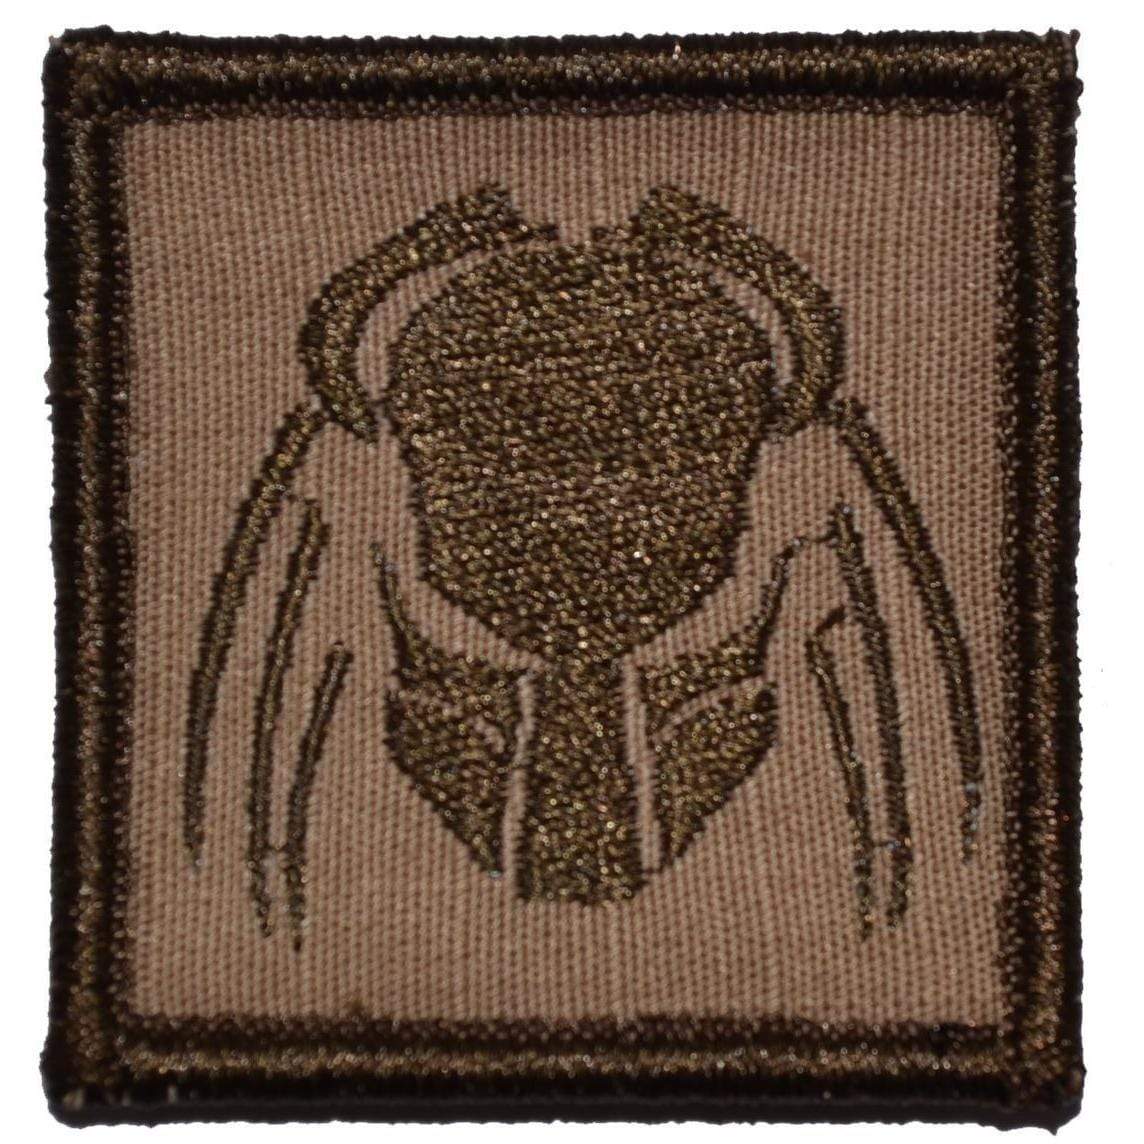 Tactical Gear Junkie Patches Coyote Brown Predator Head - 2x2 Patch